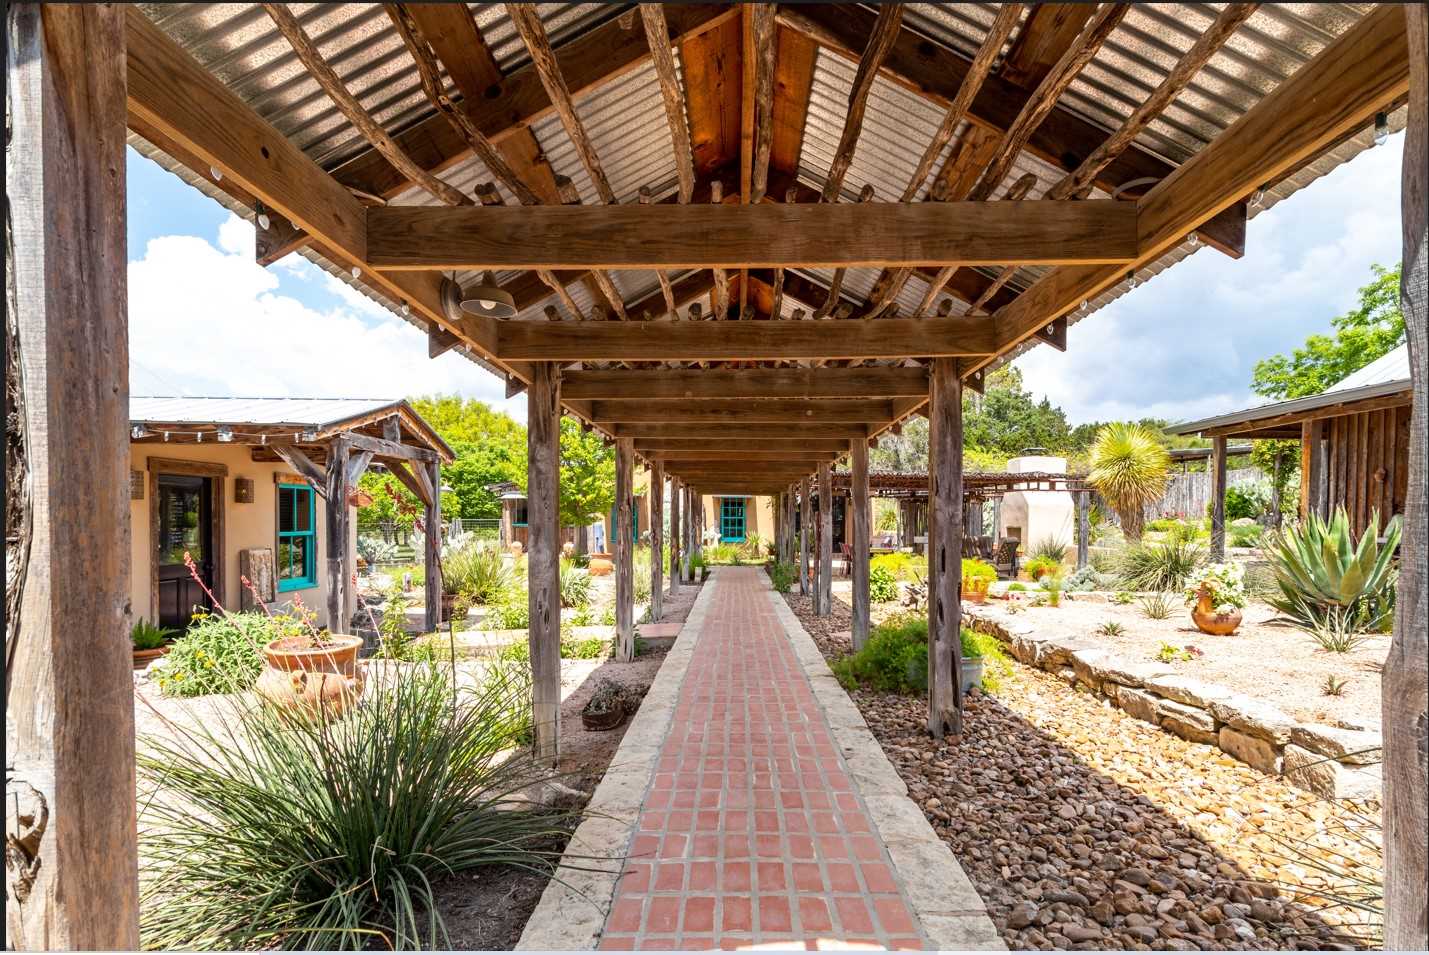                                                 The focal point of Mucho Gusto is this brick-paved breezeway, strung with glittering outdoor lighting.